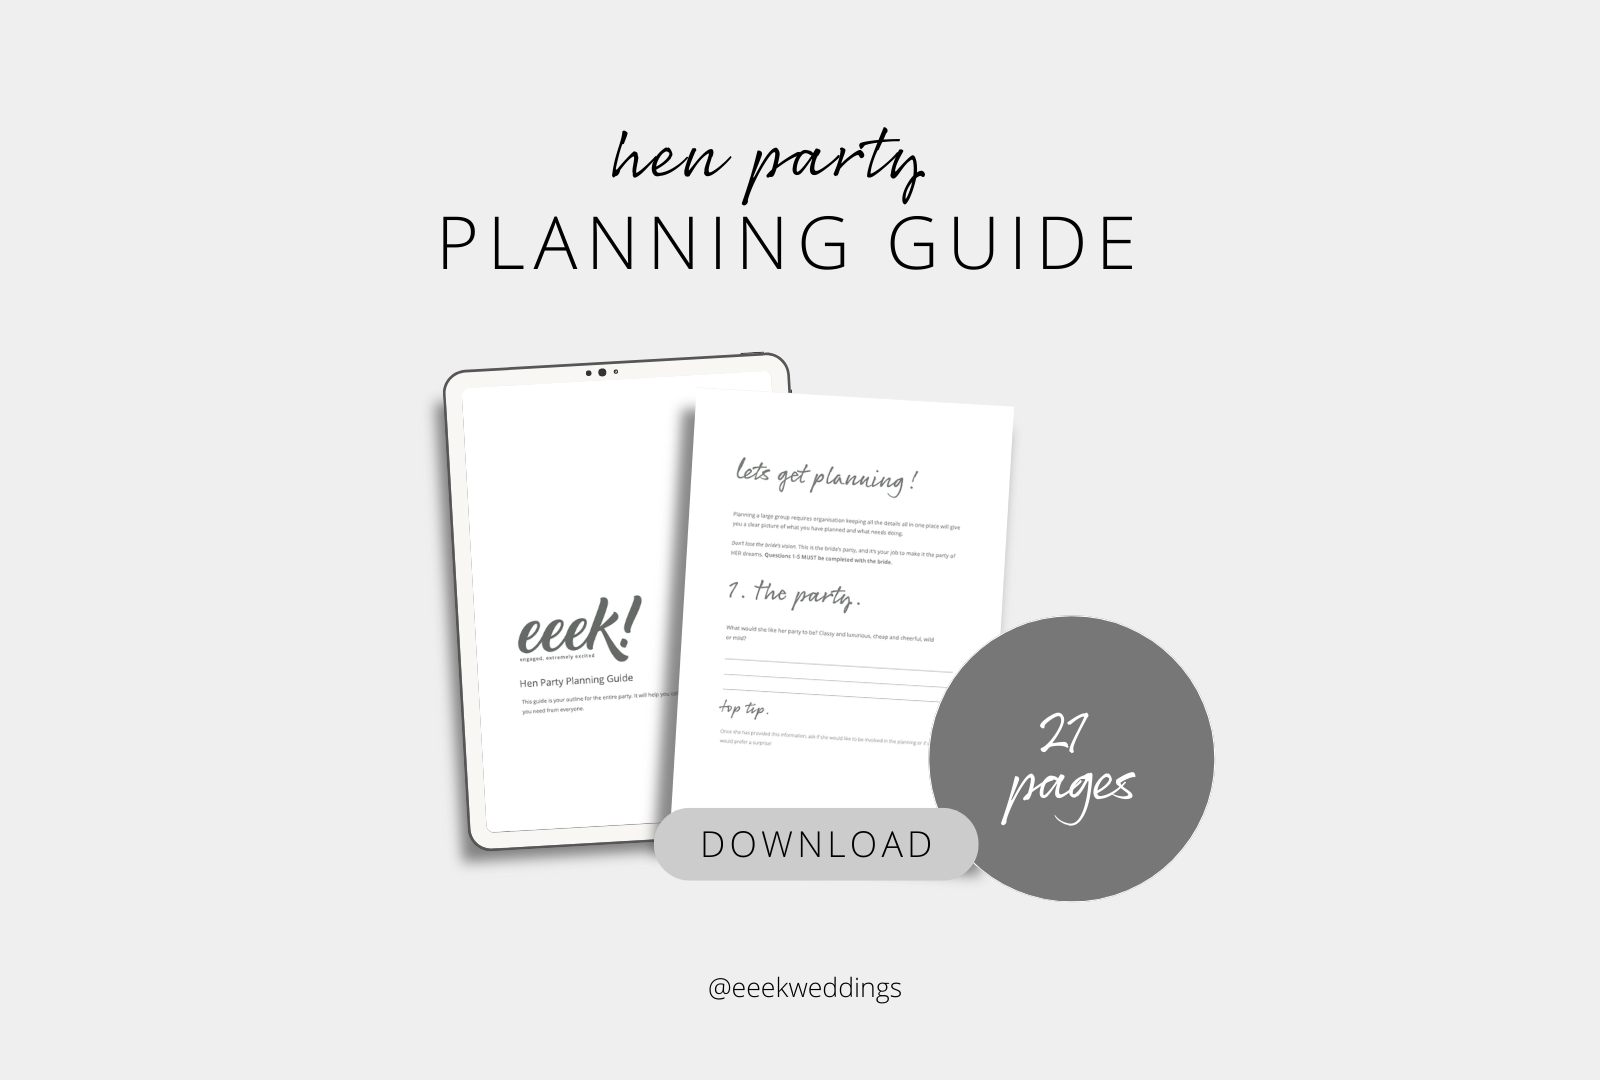  Hen Party Planning Guide - Get married in Cornwall with eeek!